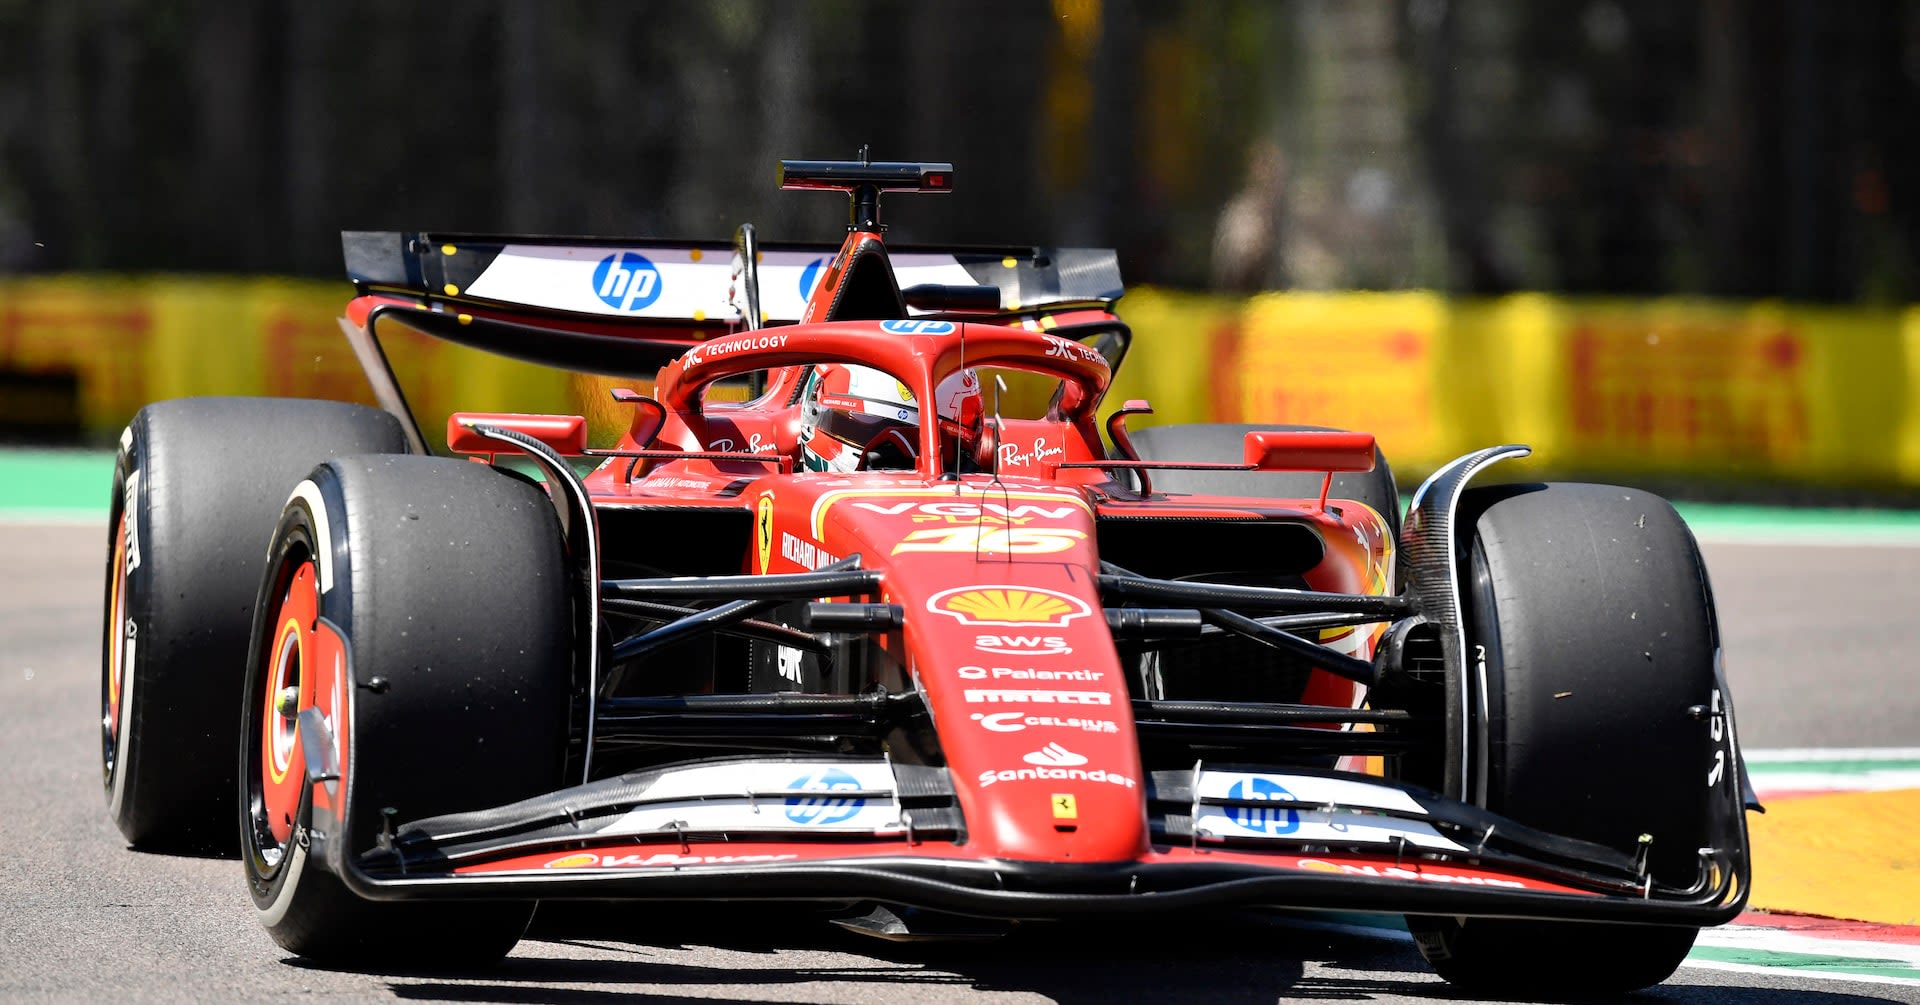 Ferrari's Leclerc fastest in first practice at Imola